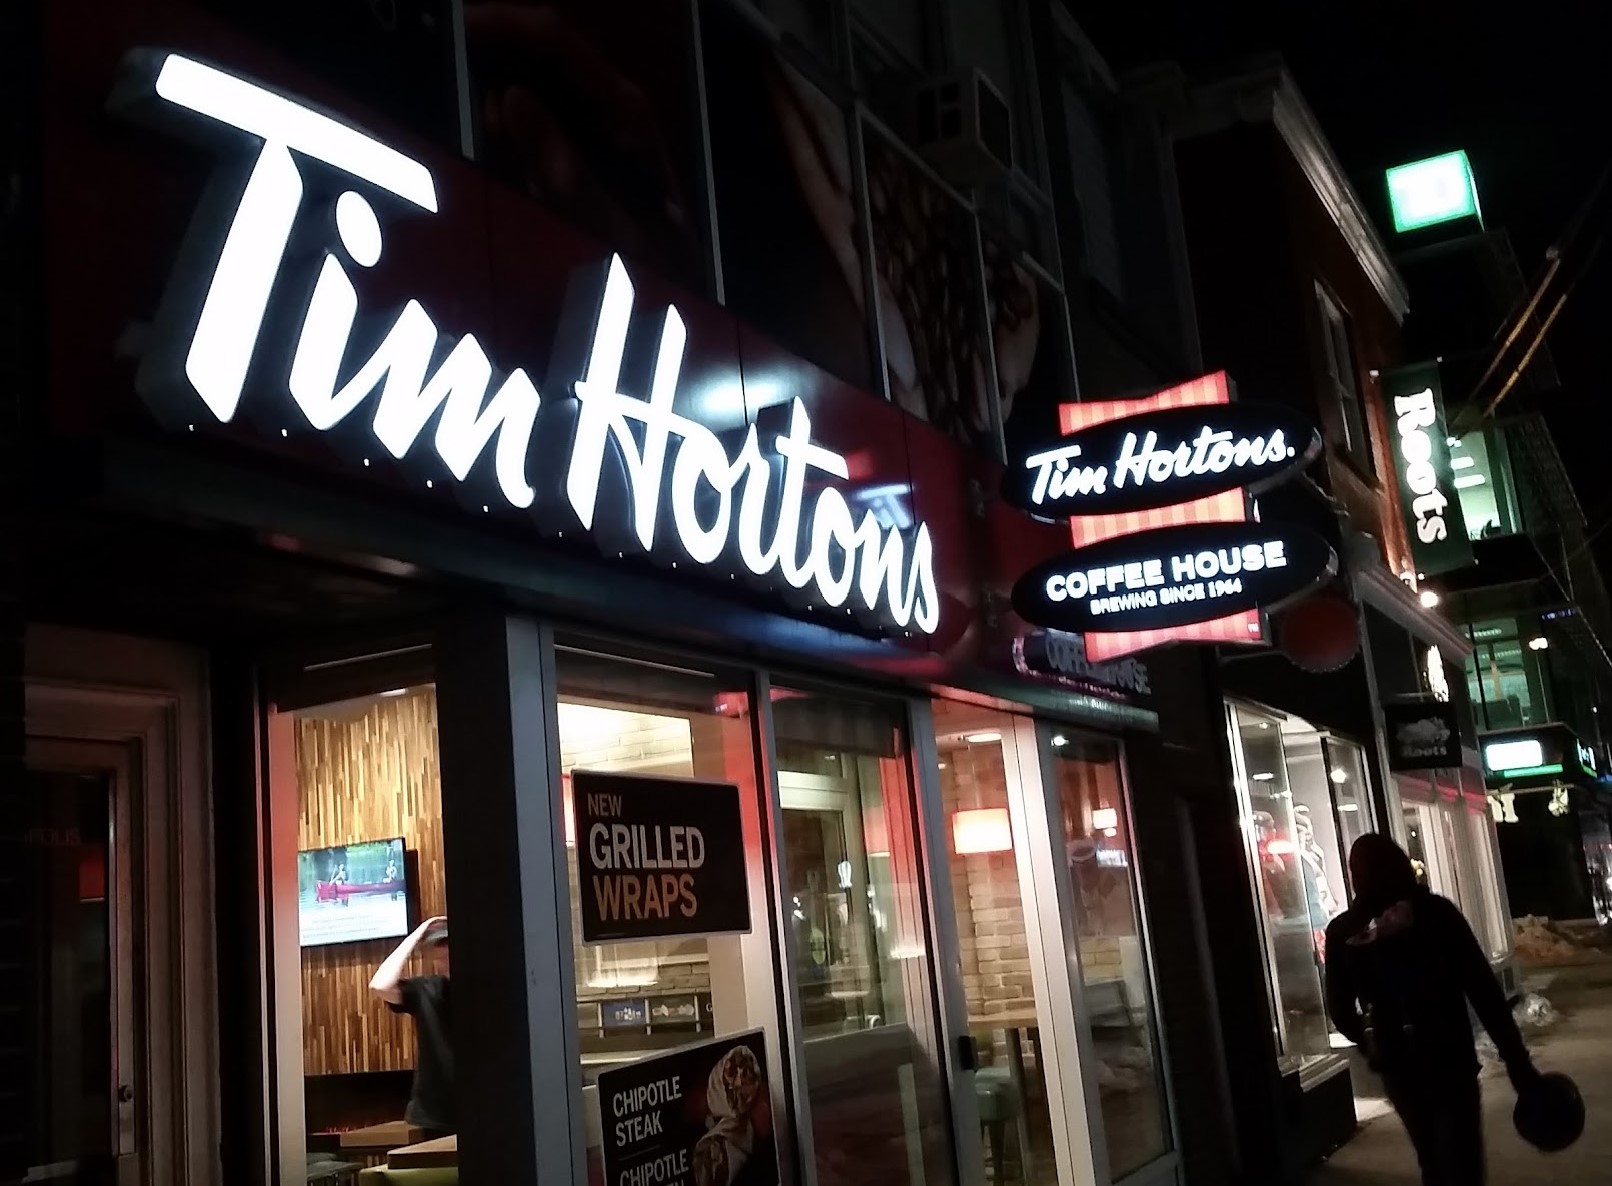 Tim Hortons has been tracking customers’ locations